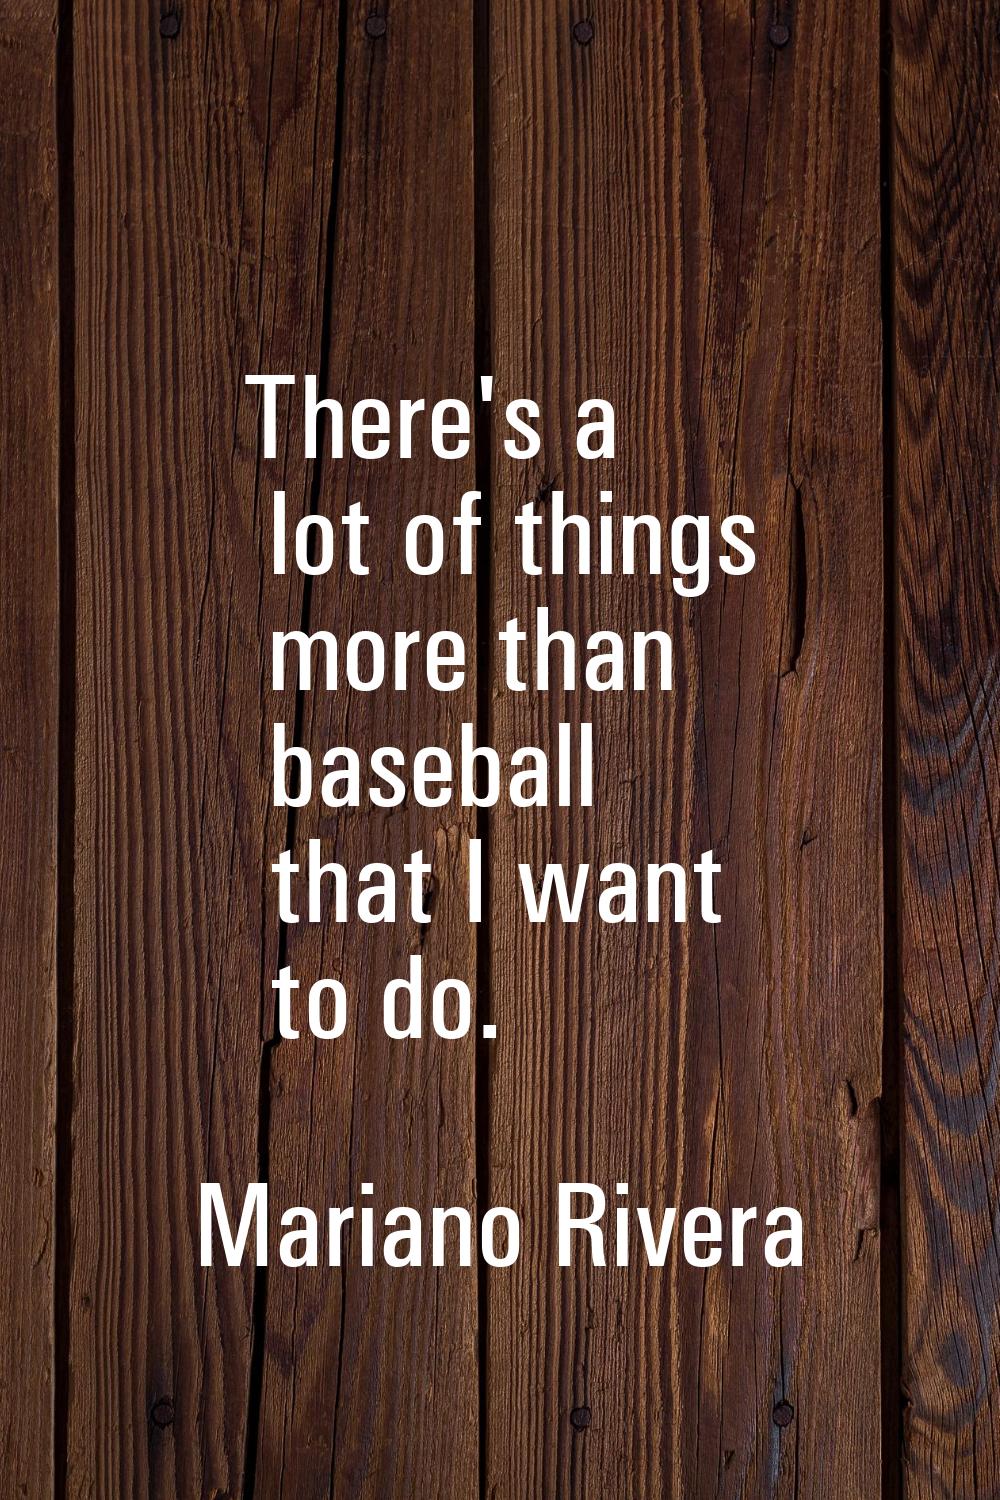 There's a lot of things more than baseball that I want to do.